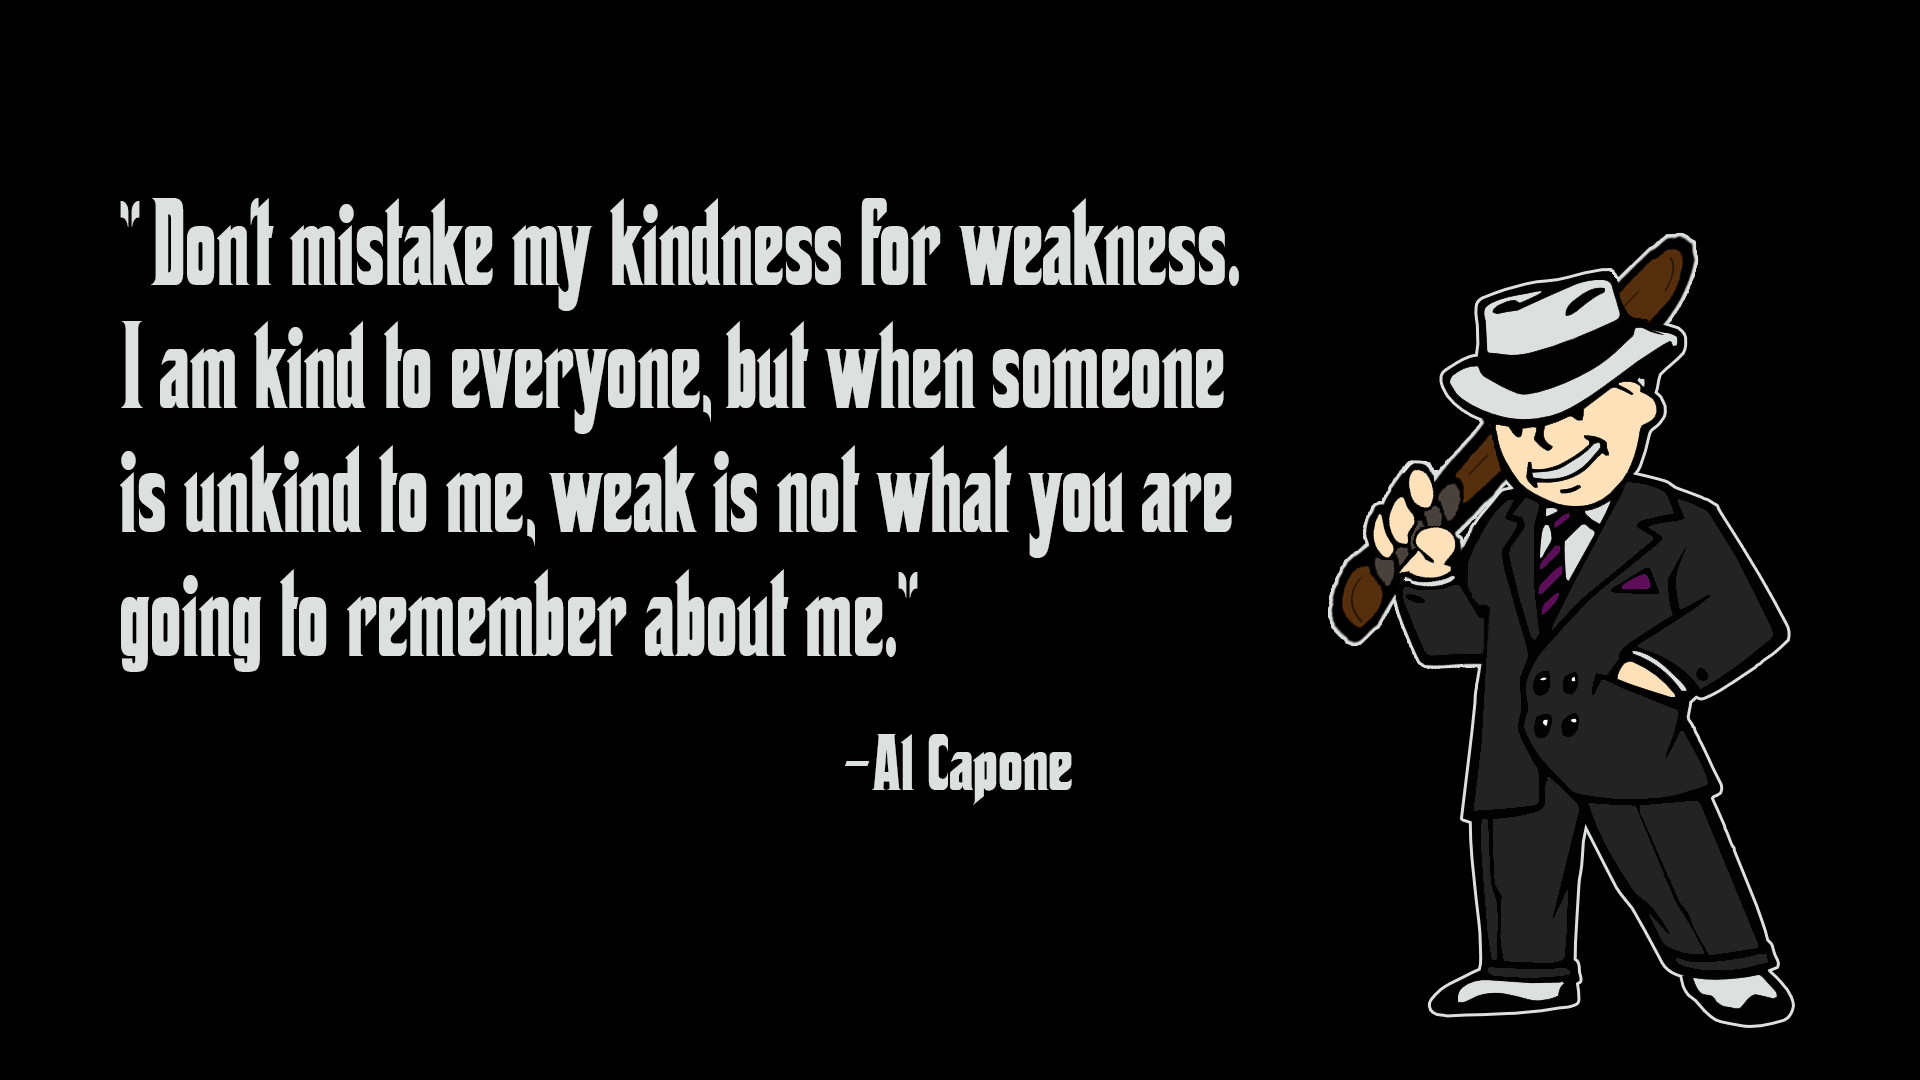 1920x1080 Fallout Kindness Al Capone by ImTabe Fallout Kindness Al Capone by ImTabe